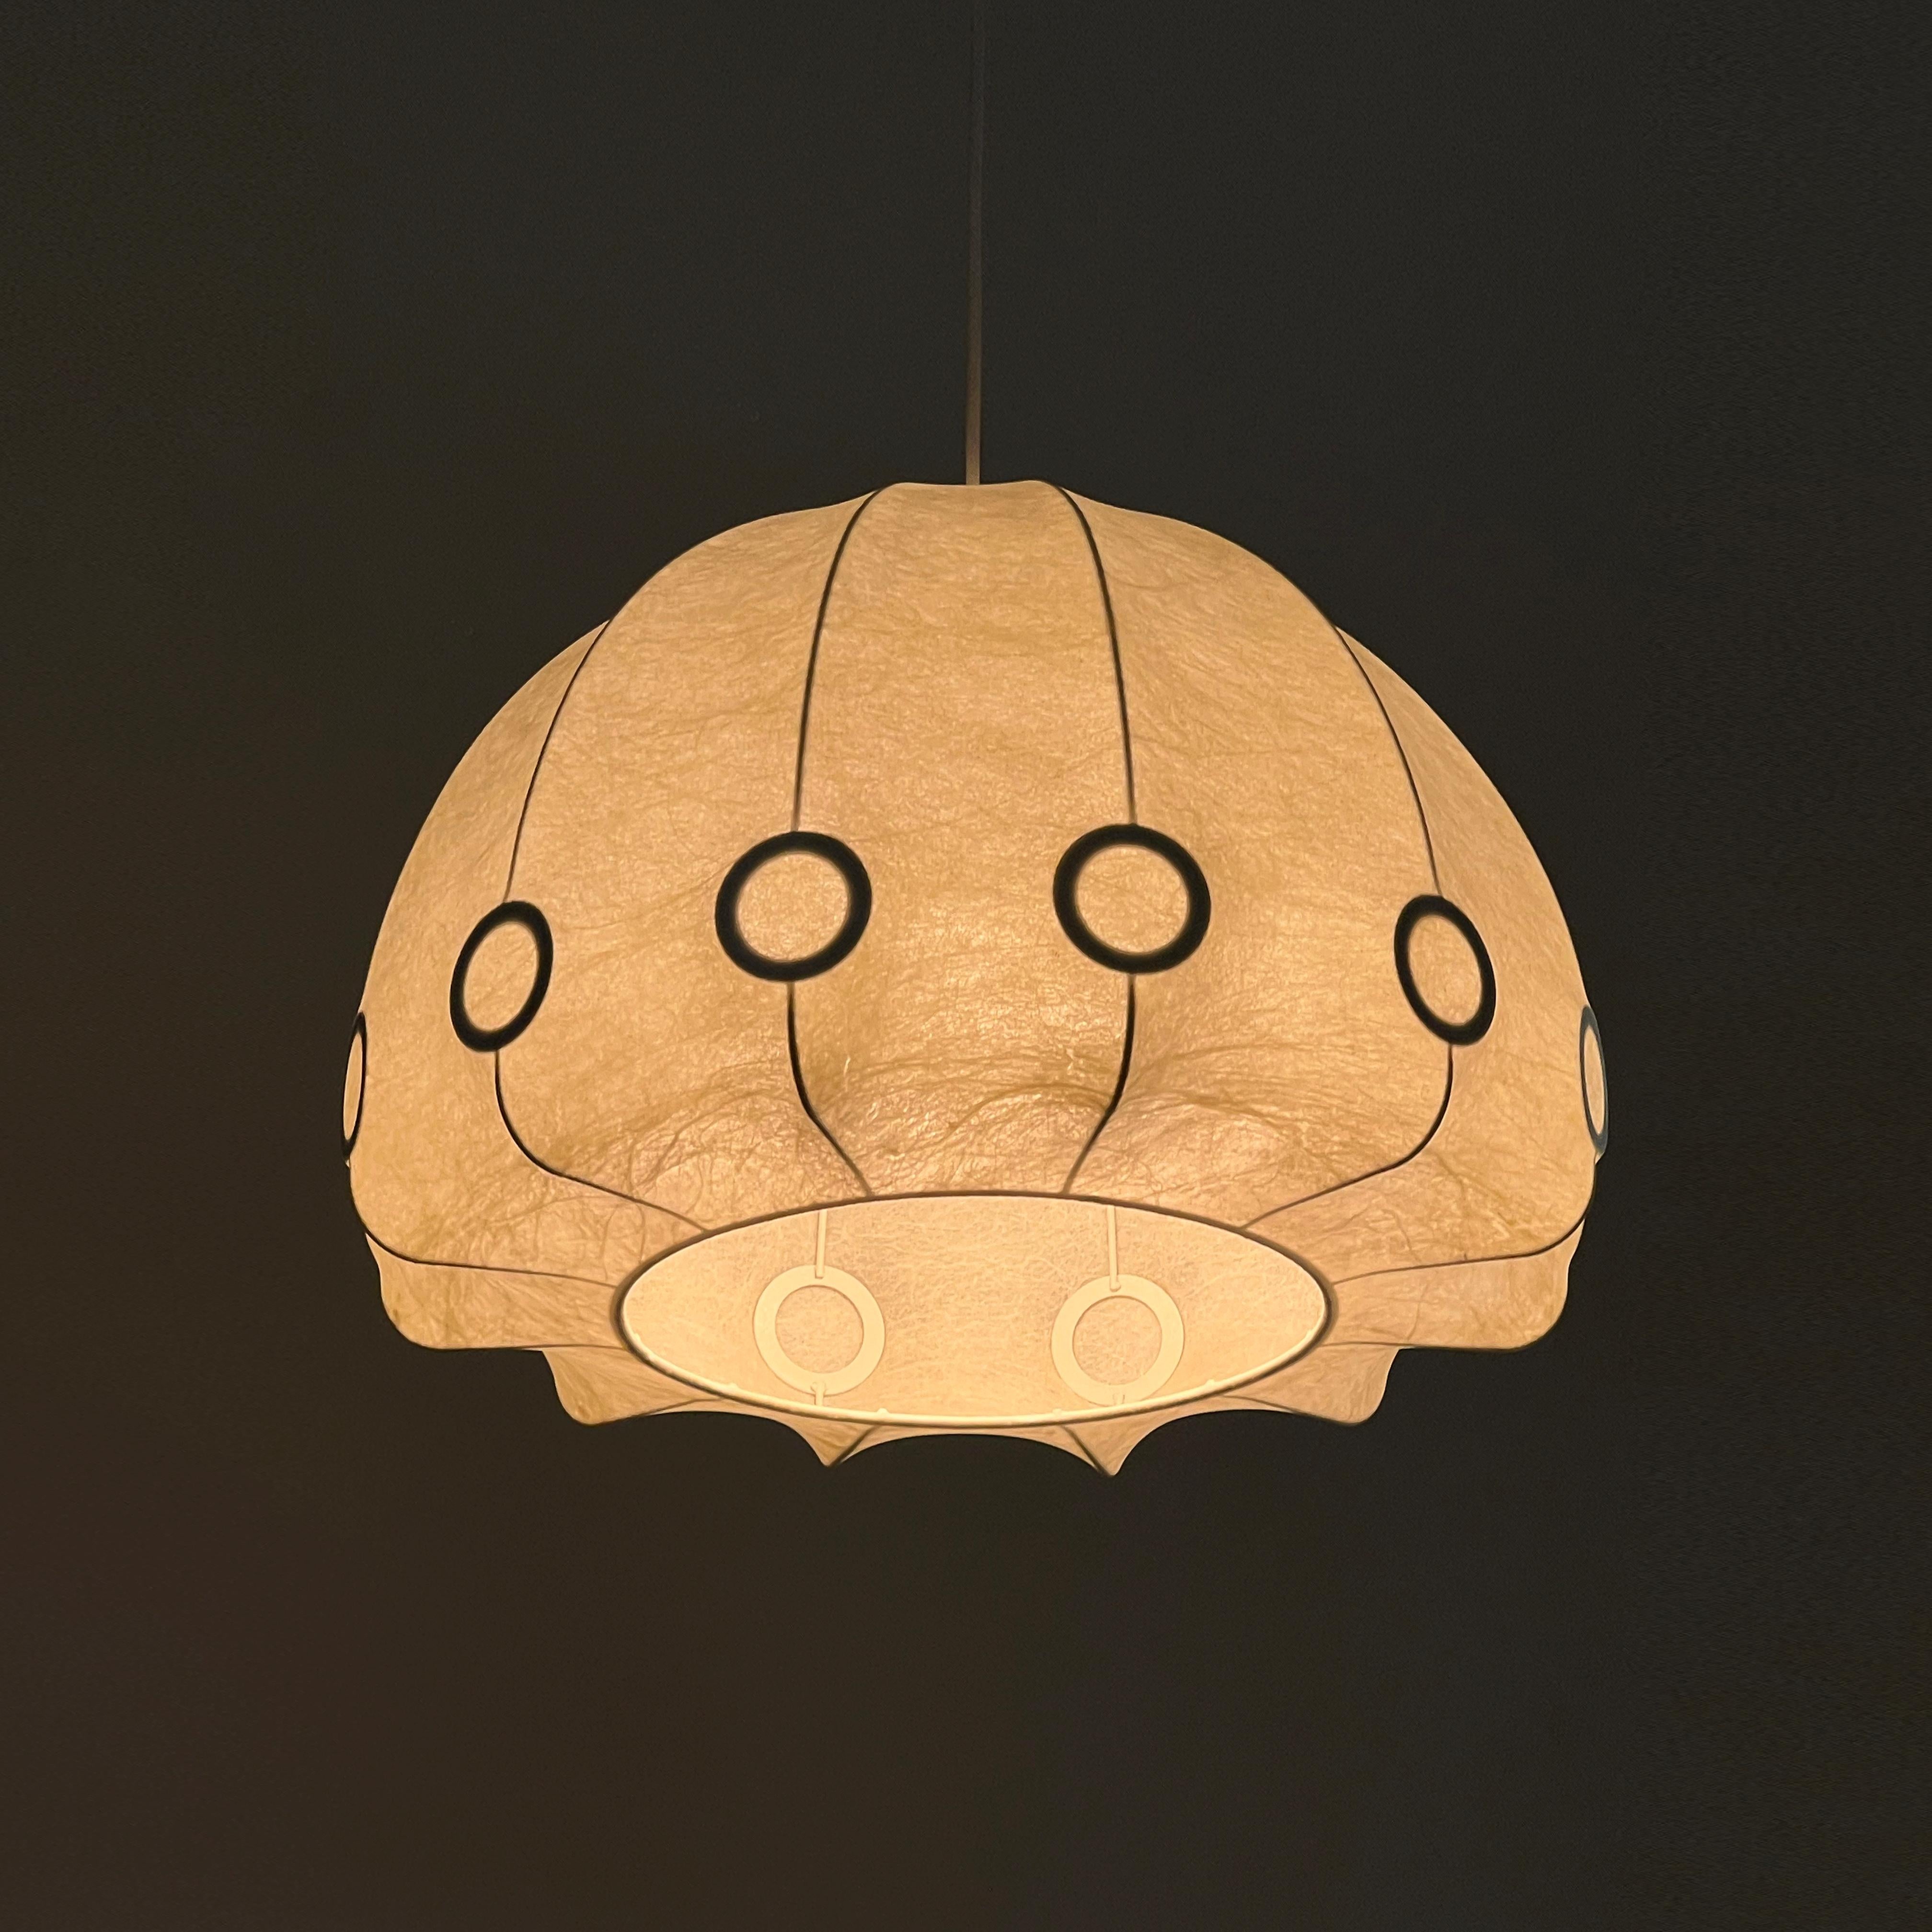 Cocoon pendant light designed by Friedel Wauver for Goldkant Leuchten, Germany 1960s

One of the most remarkable aspects of this piece is its ability to transcend the boundaries of time and style. Despite being born in the 1960s, it feels as